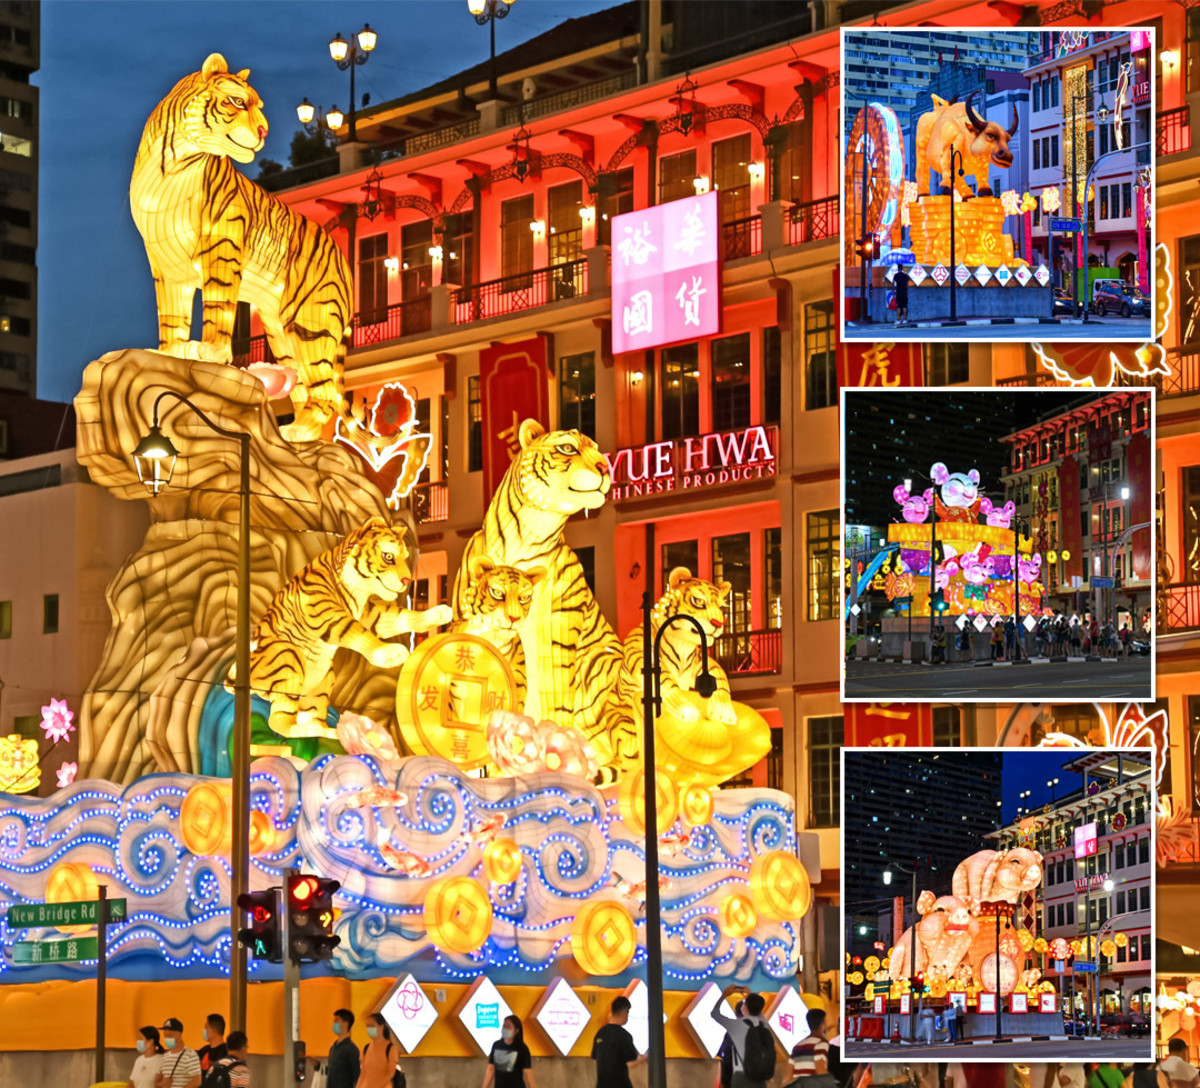 The incoming Chinese Zodiac animal for the New Year is always showcased at the Chinatown festive Light-Up. The showpiece for this picture is that for Year of the Tiger 2022.